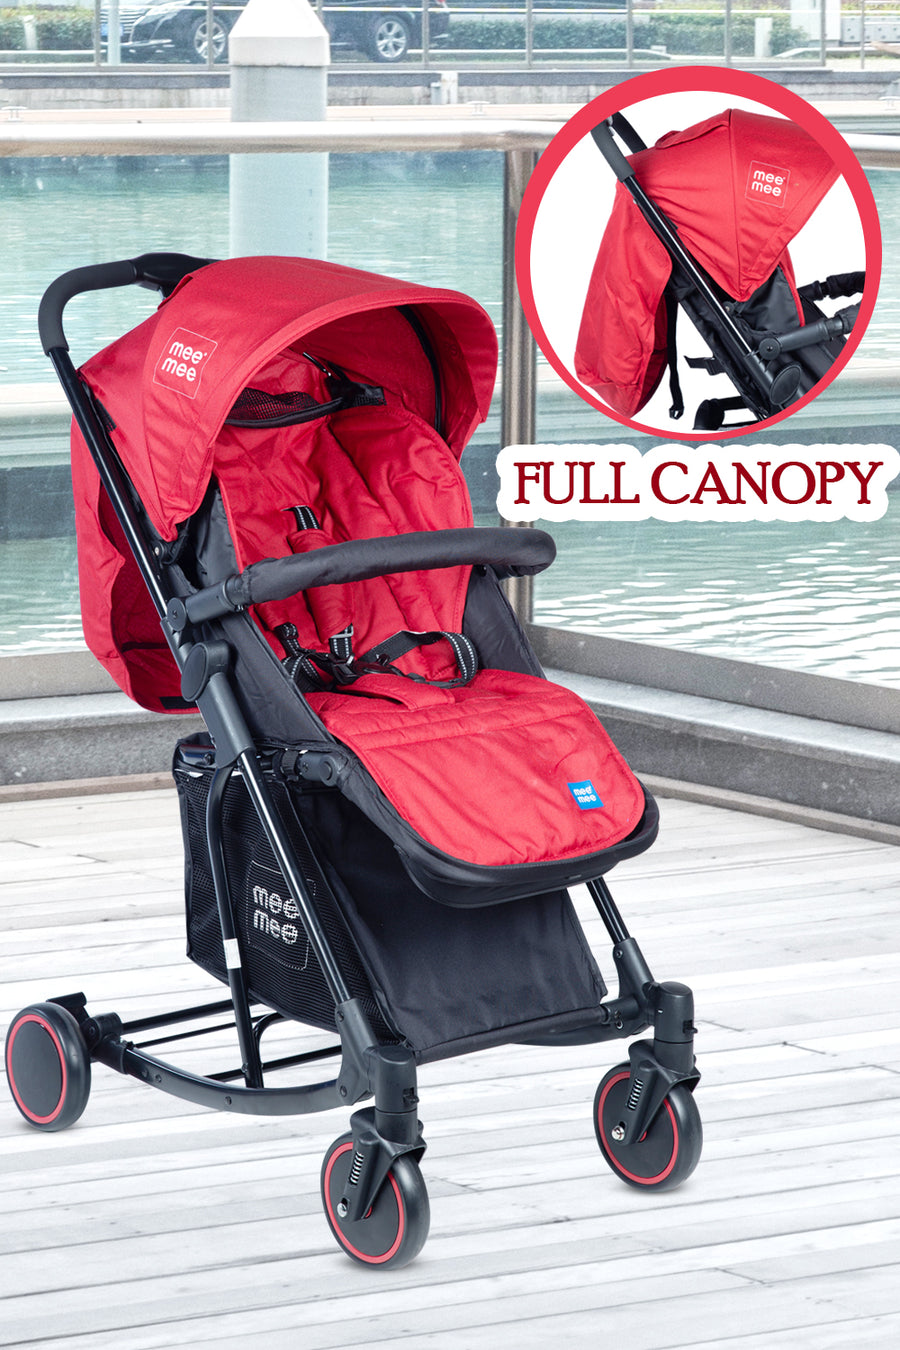 Mee Mee - Baby Pram Stroller with Full Canopy